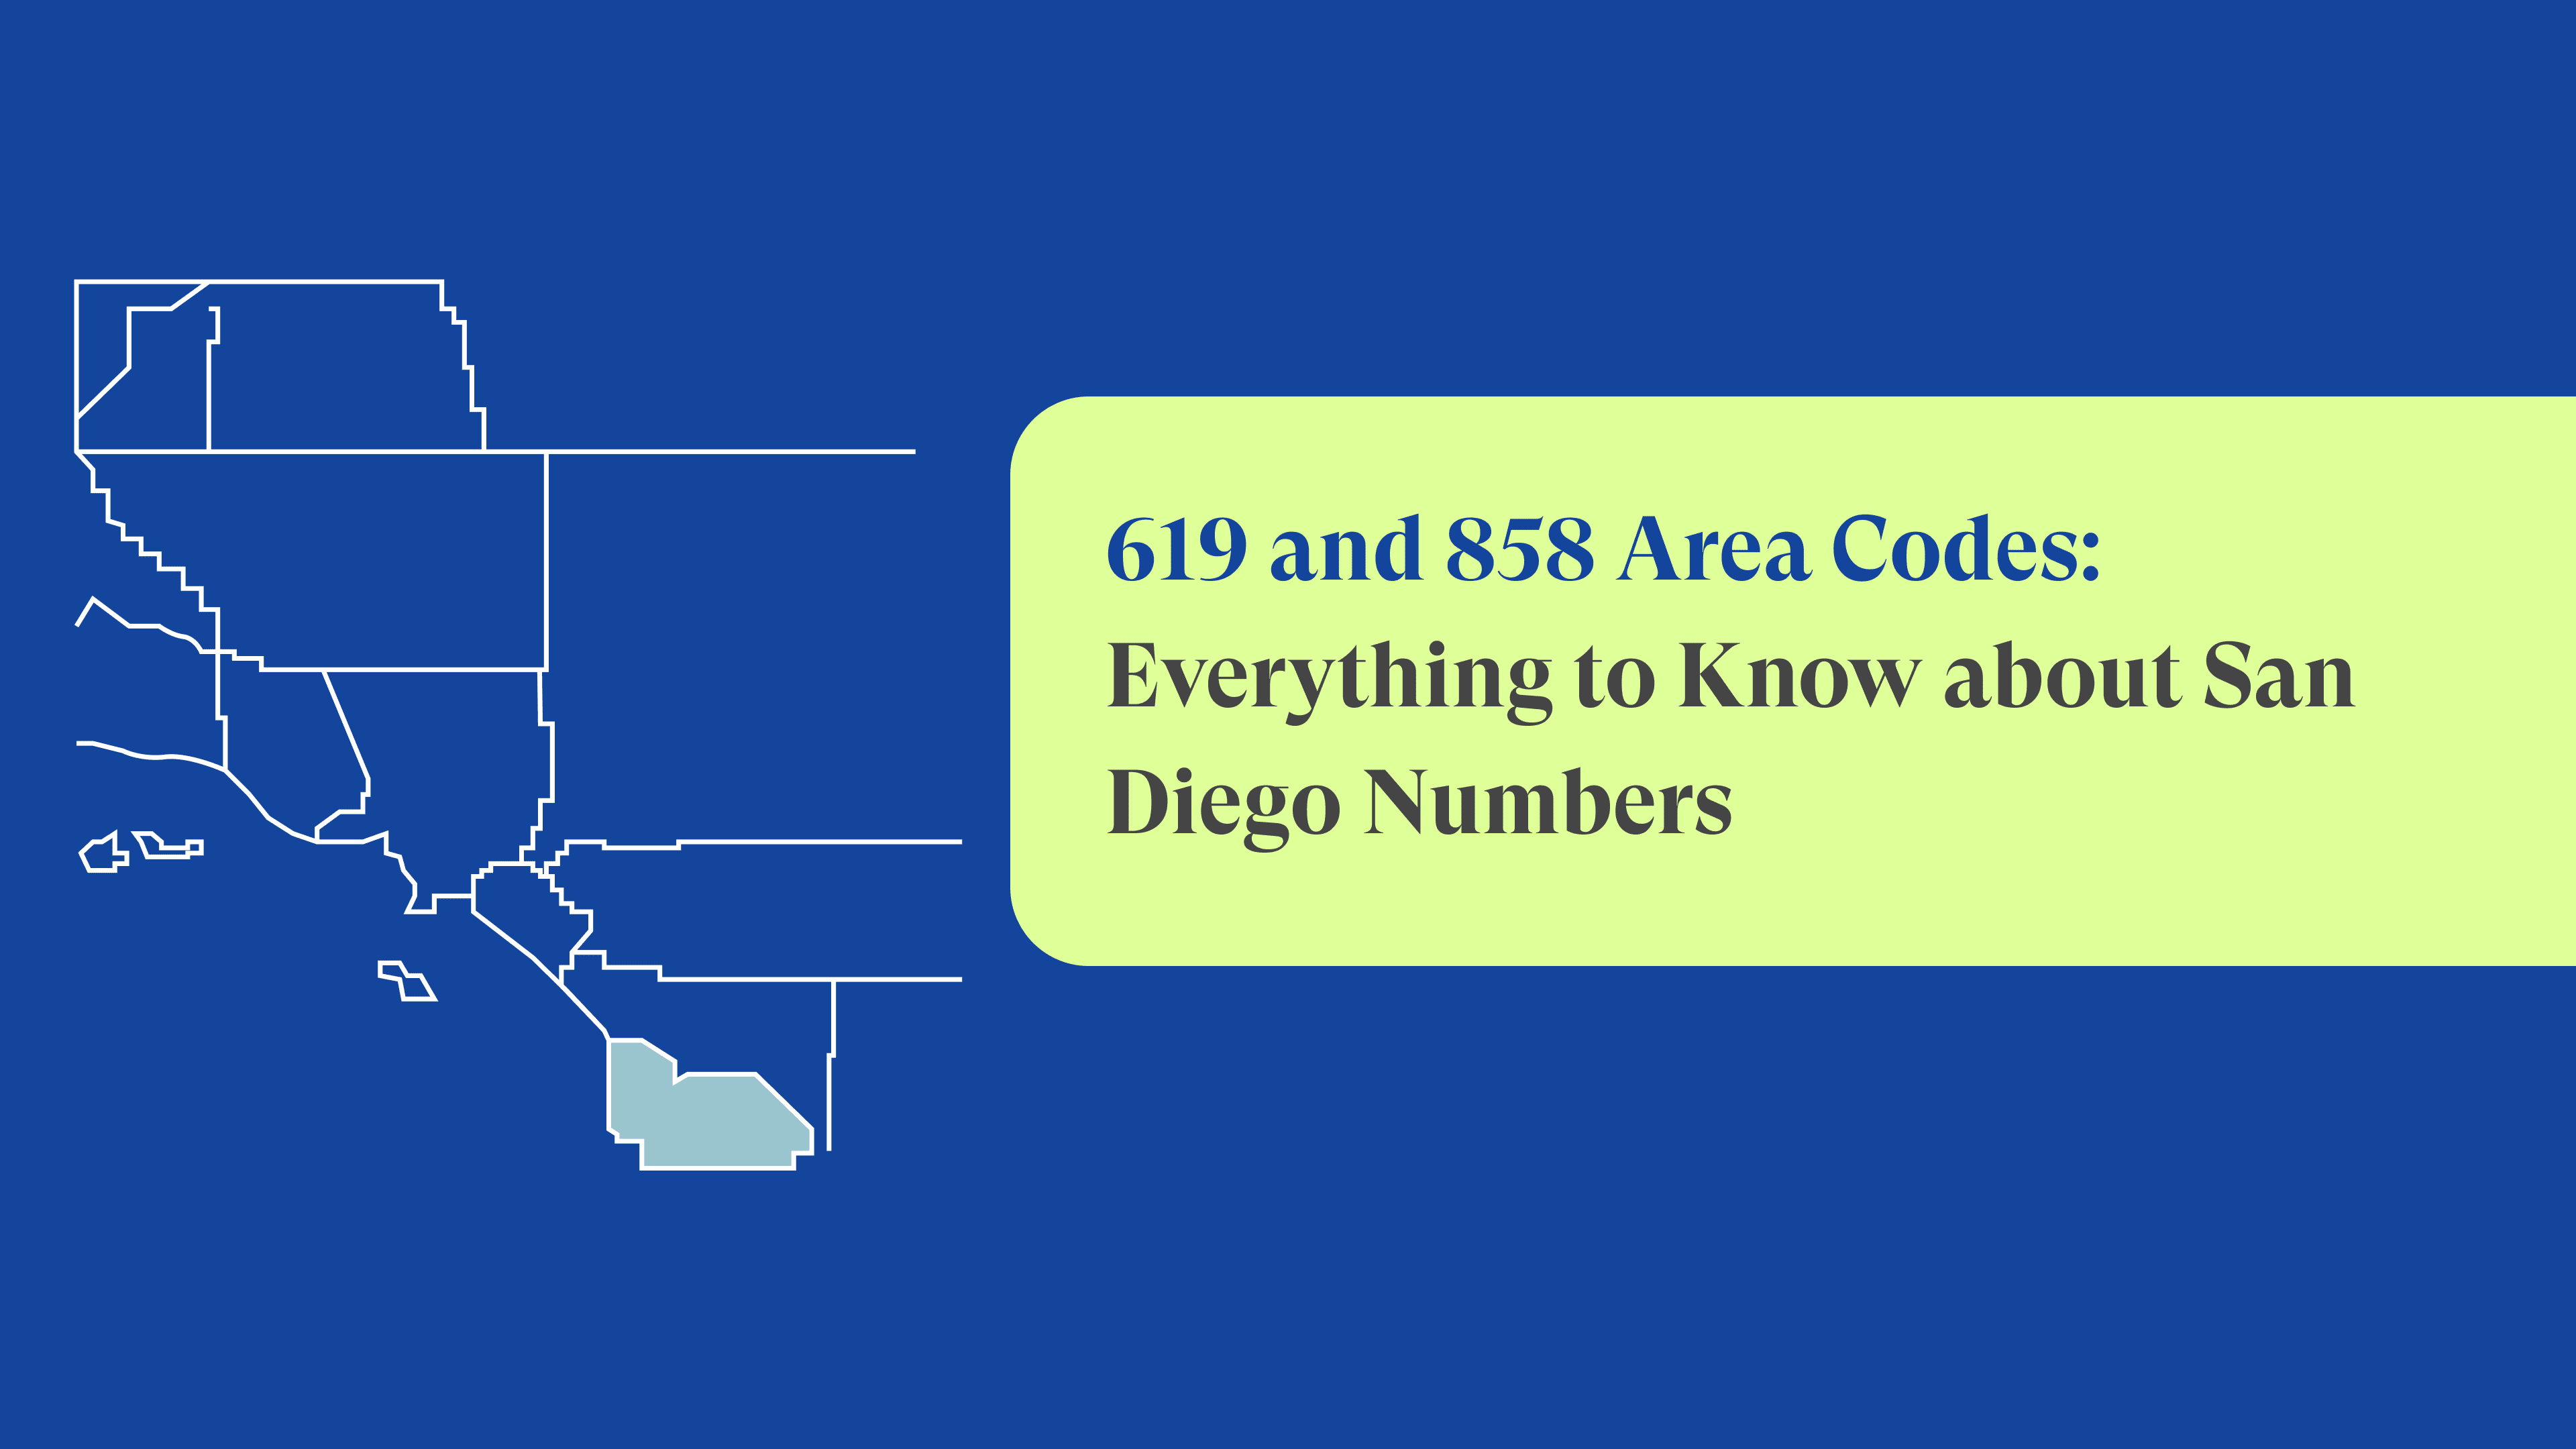 Area Codes 619 and 858: San Diego, California Local Phone Numbers